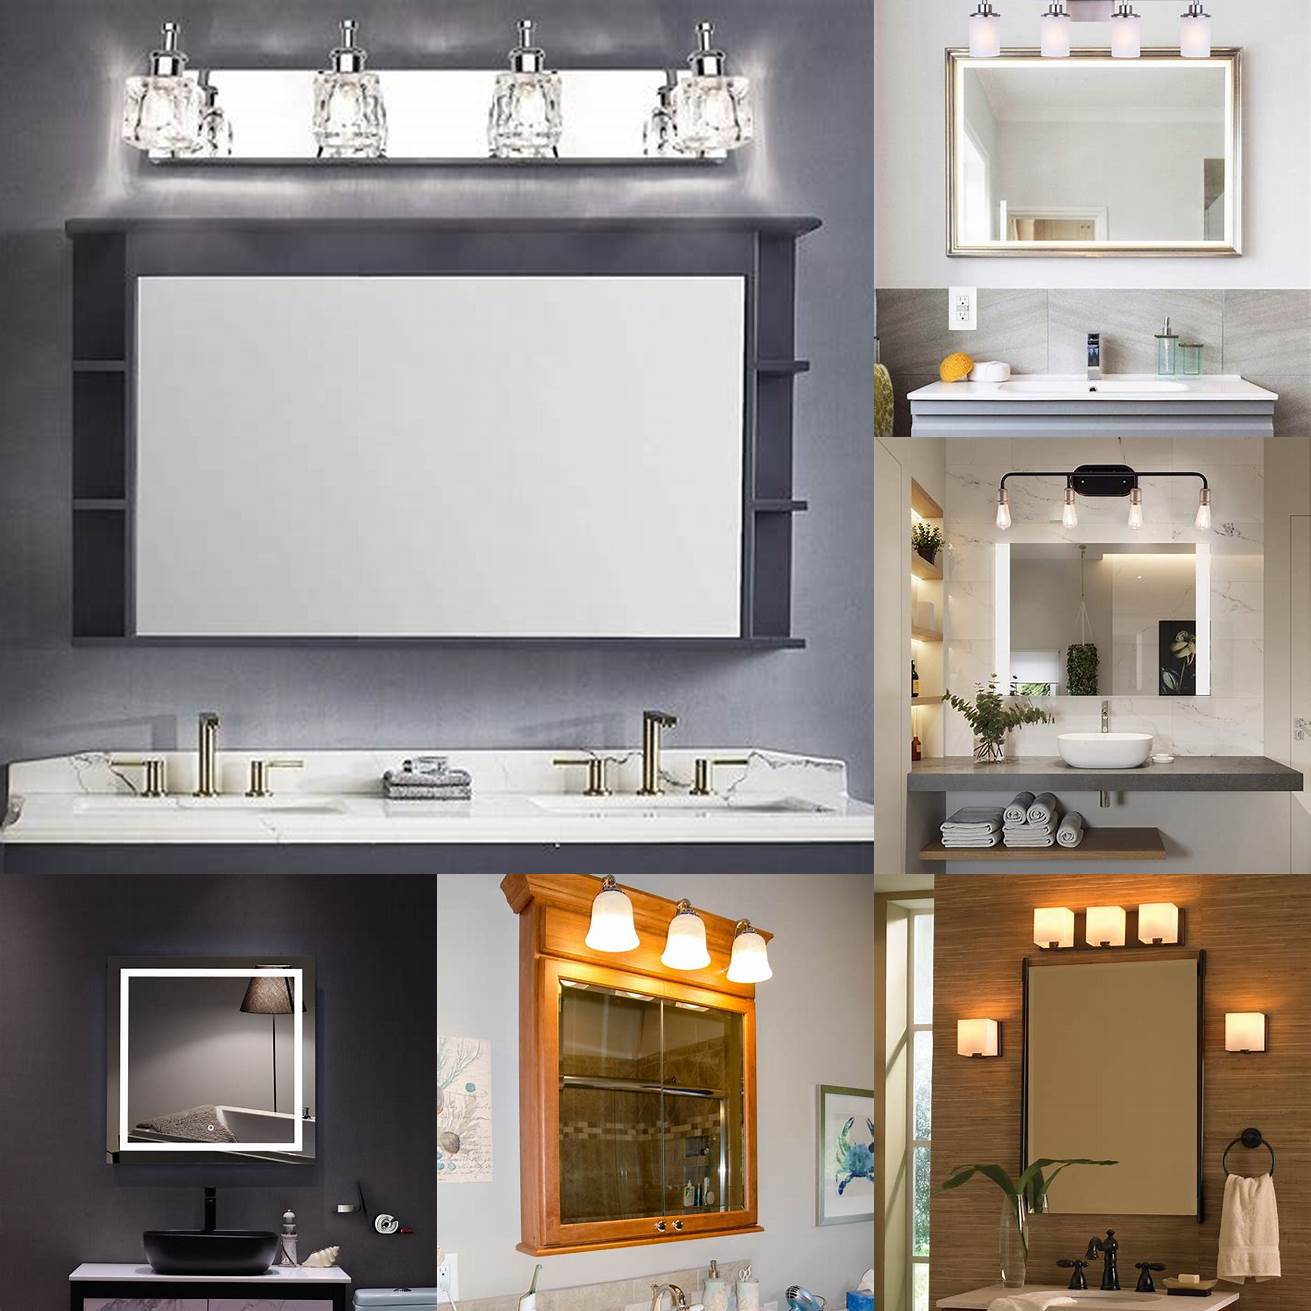 Image 5 A wall mounted vanity with a built-in mirror and overhead lighting